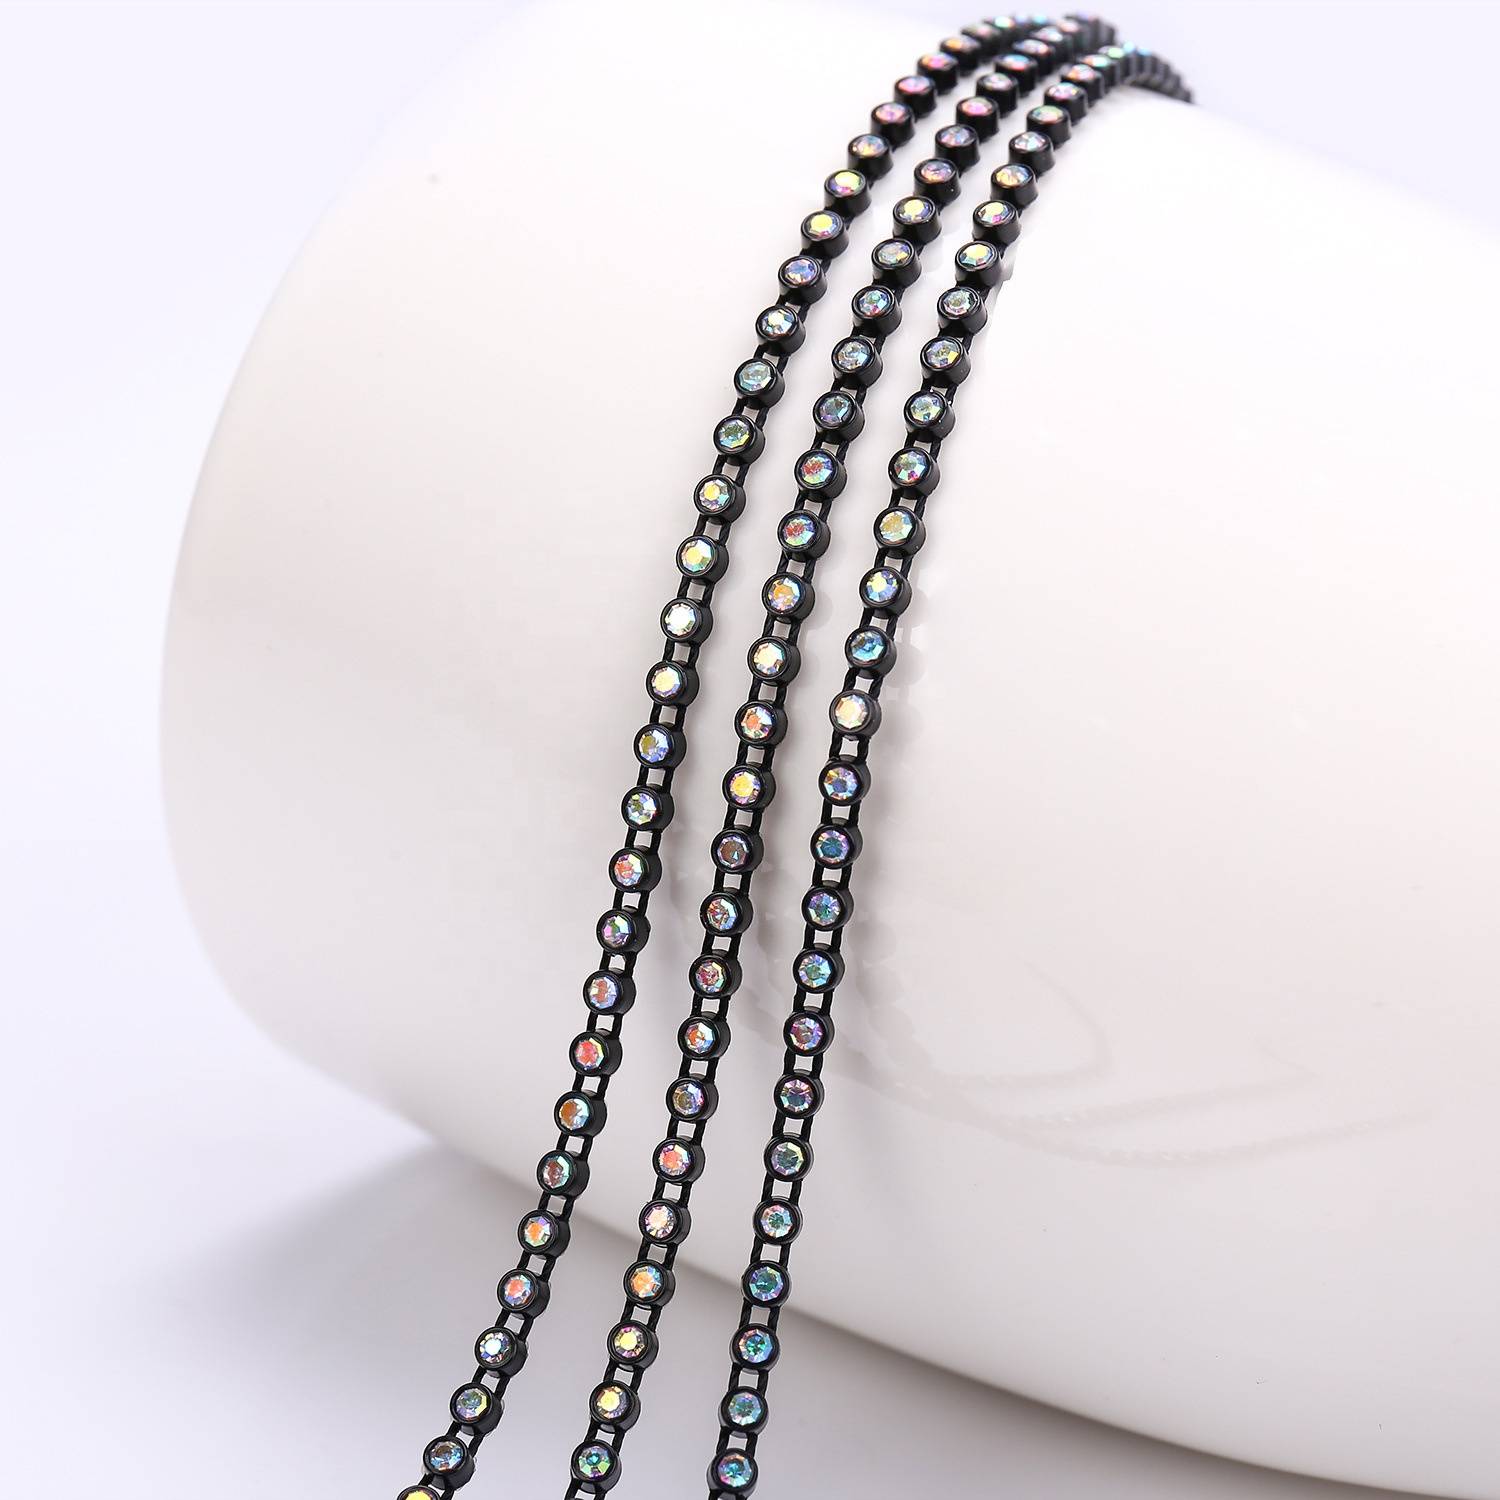 Wholesale High Quality SS6 SS8 Cup Chain Rhinestone Trim by the Yard